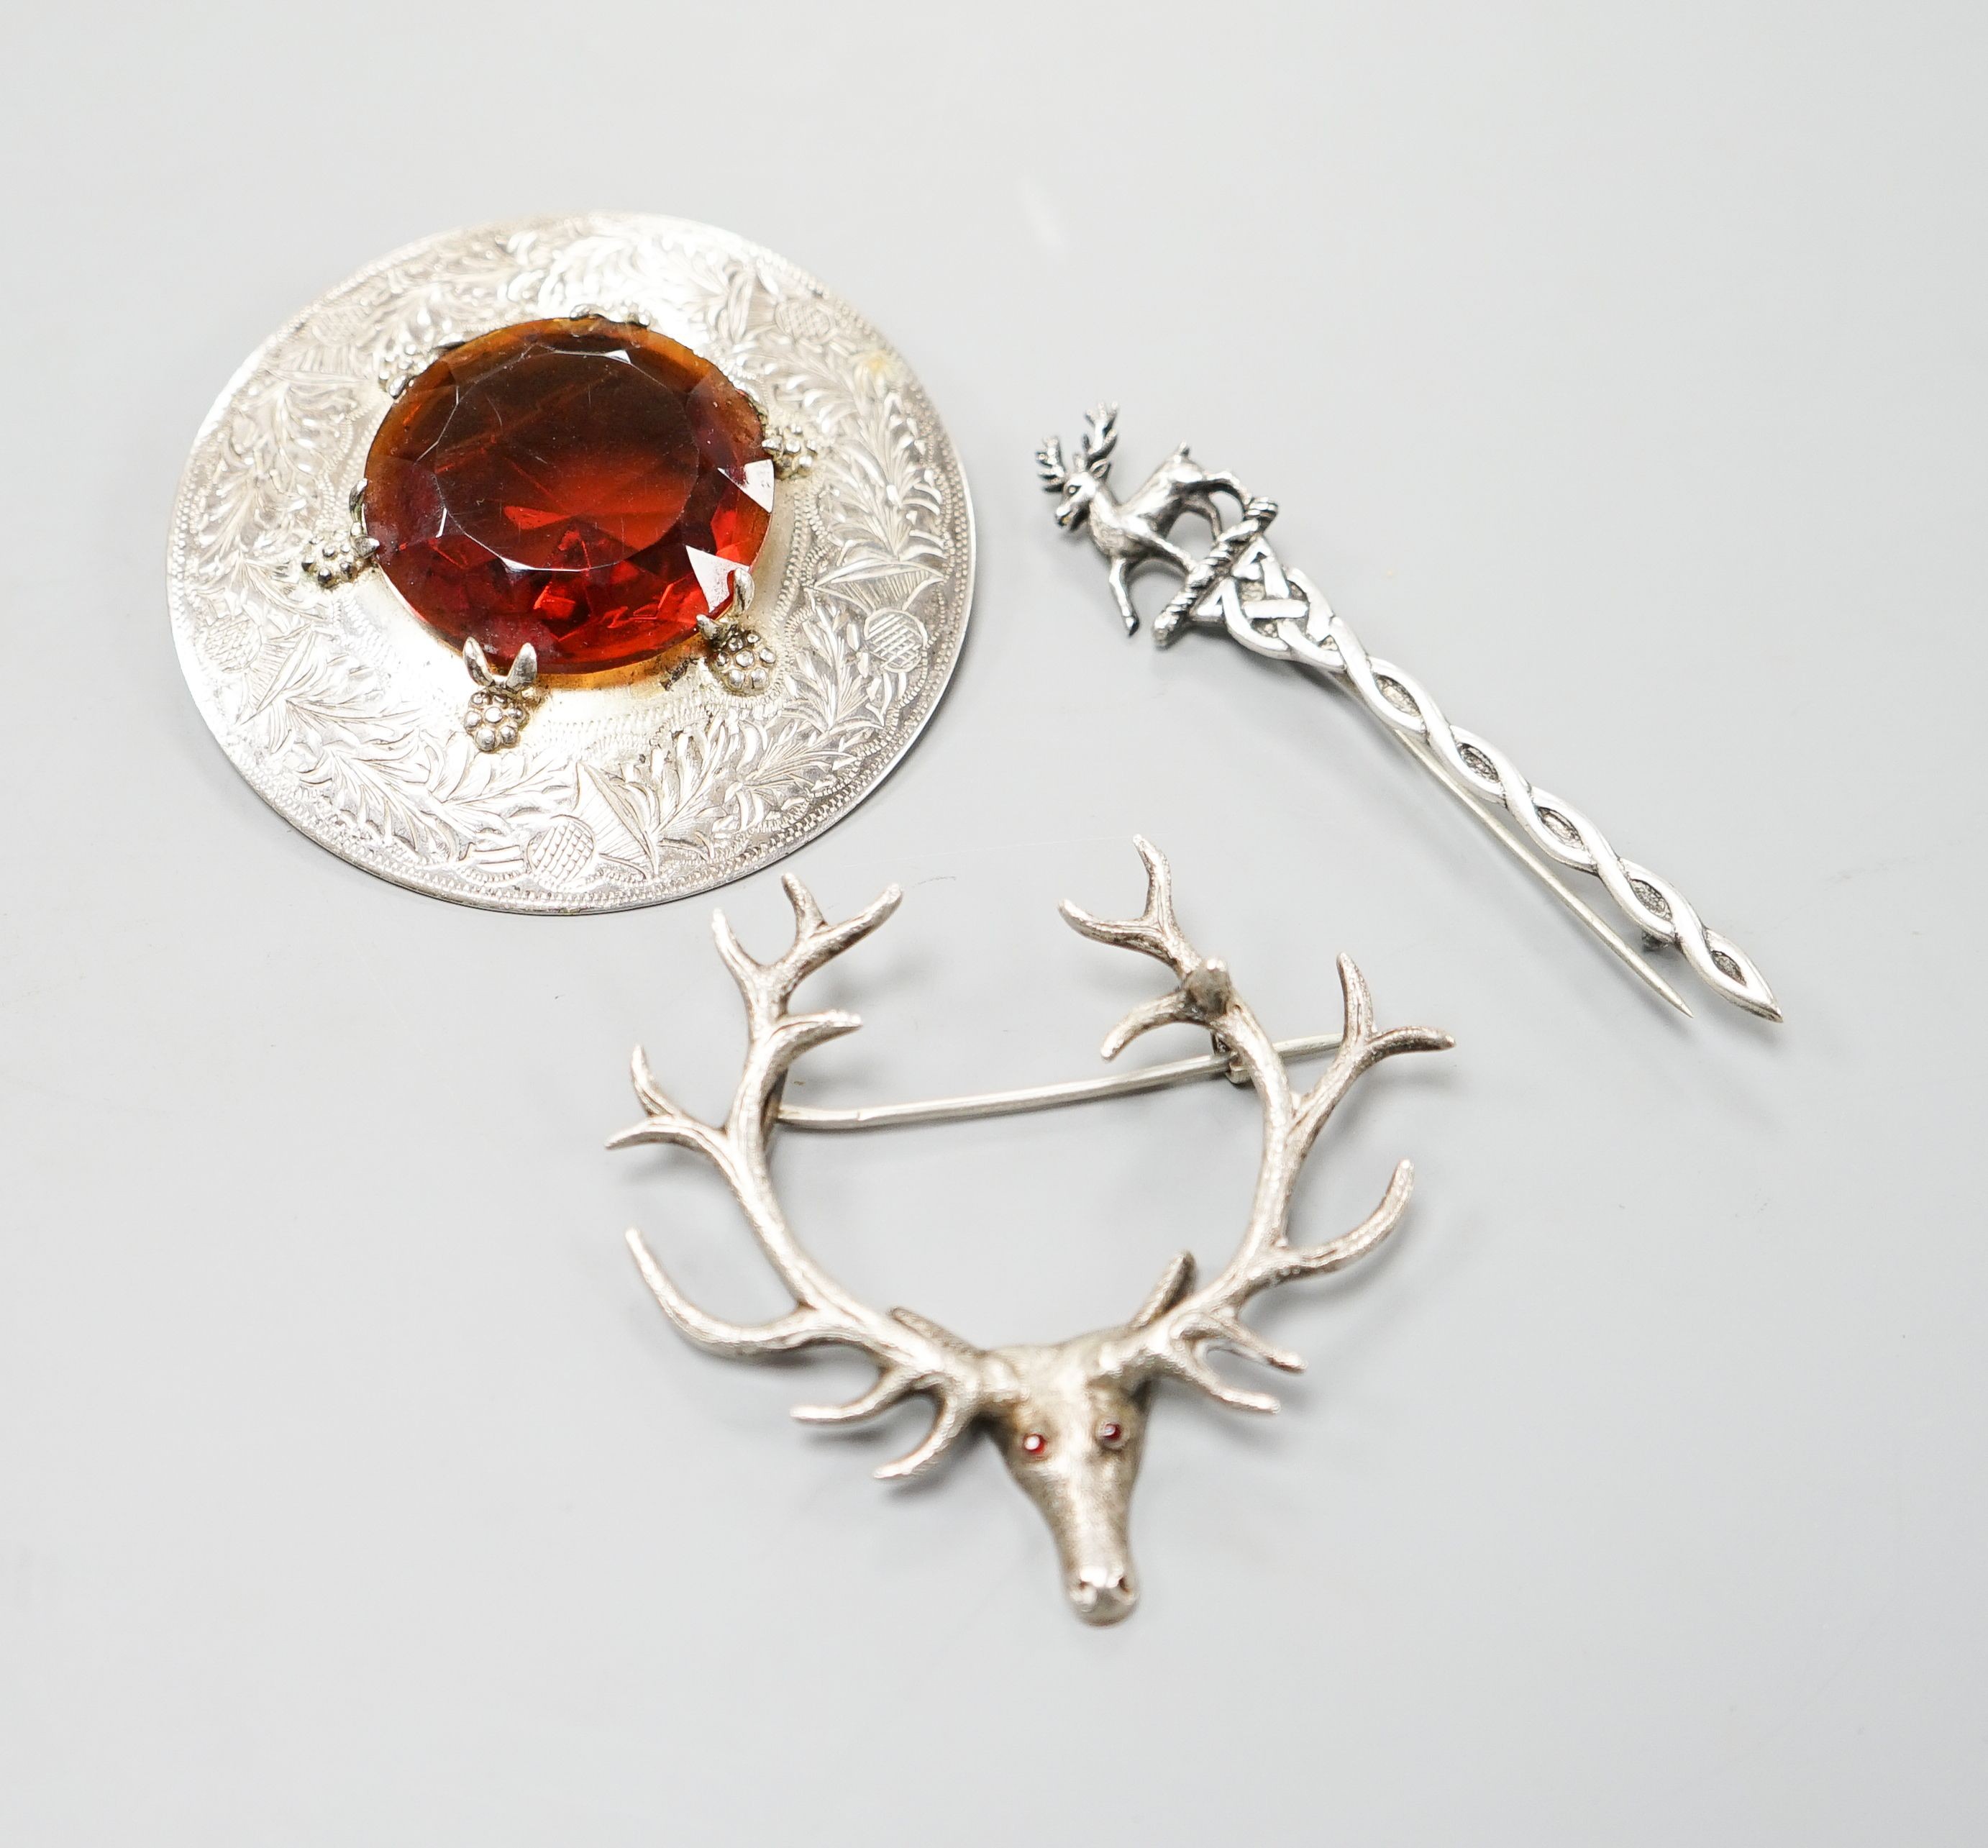 A Scottish silver and paste set circular brooch, Glasgow, 1952, together with a Scottish silver brooch, with stag terminal and one other metal stag head brooch.